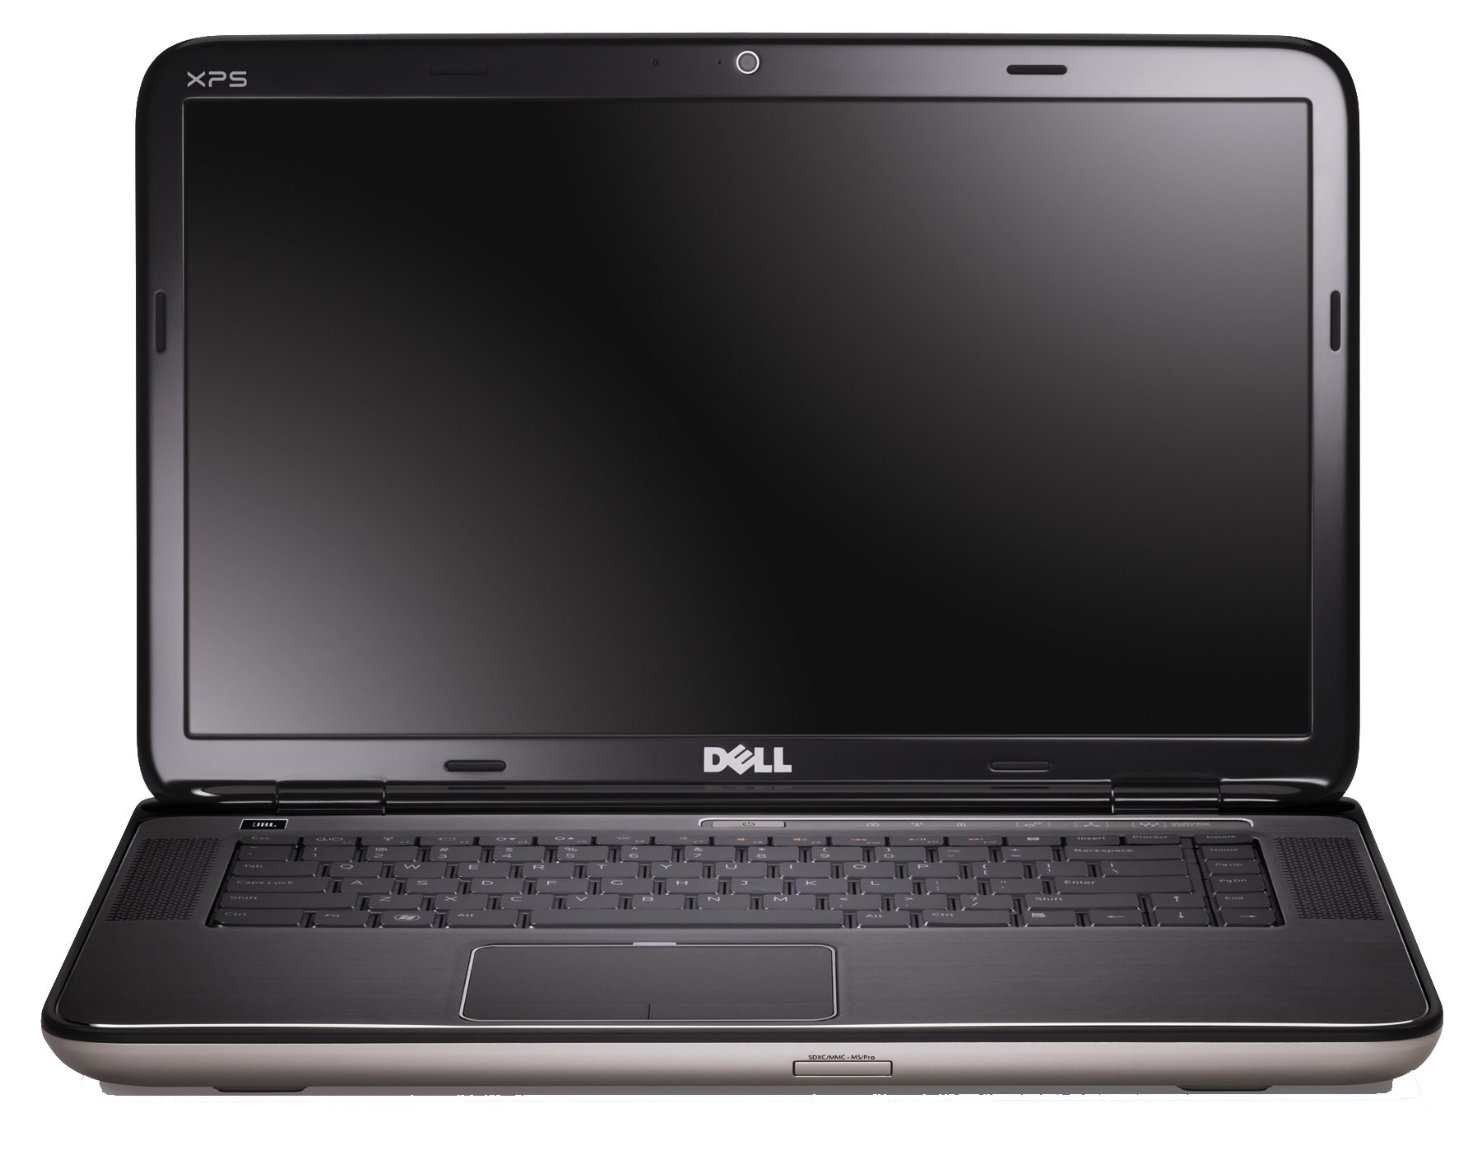  Dell XPS 15 9570-7028  #1